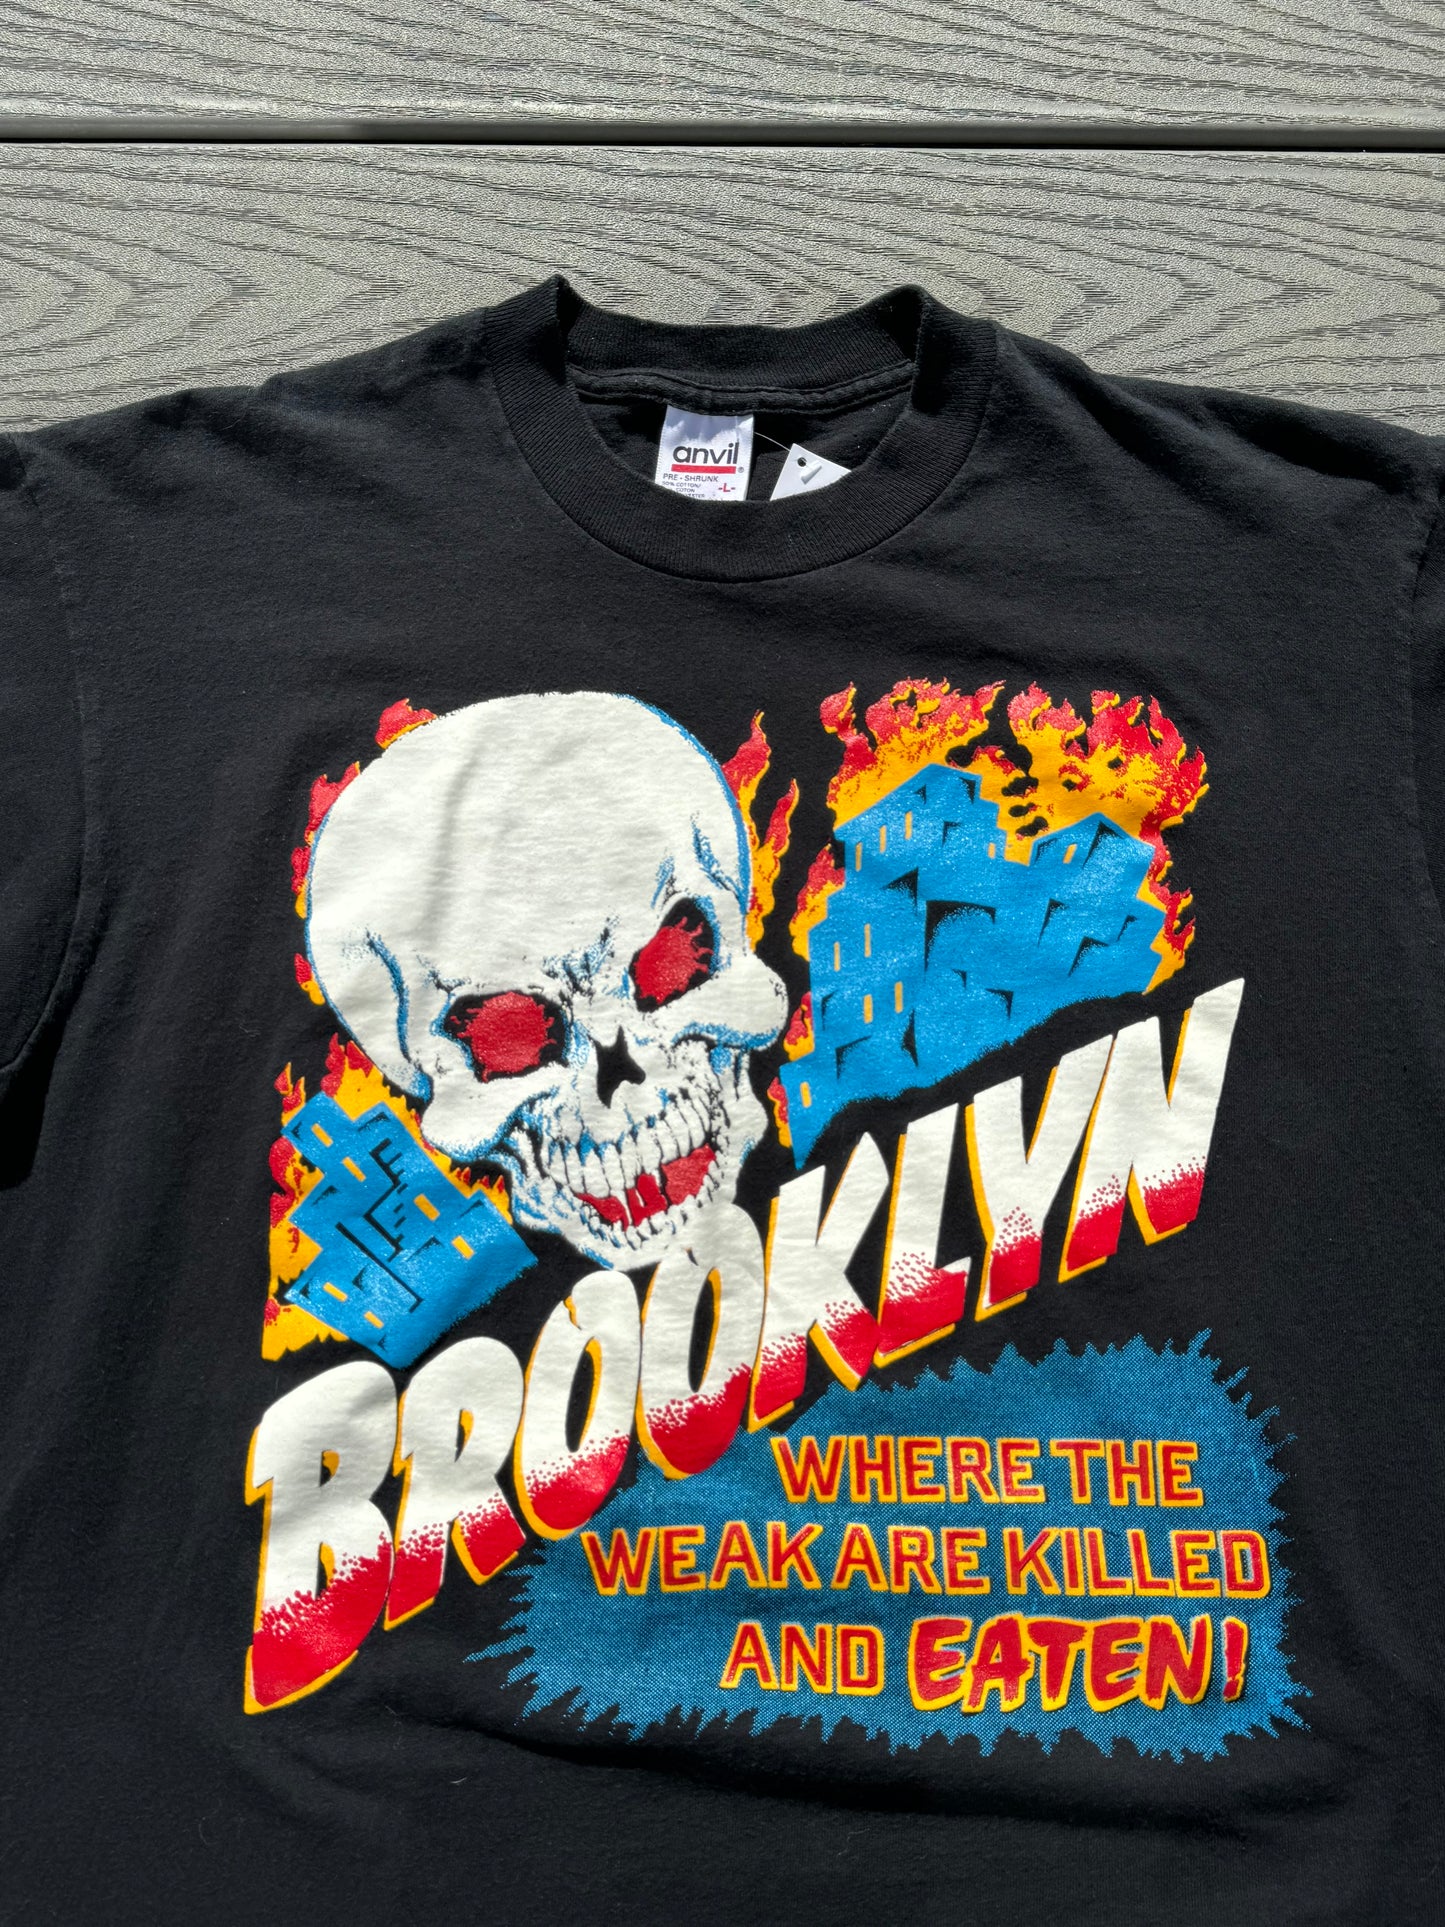 Vintage Brooklyn Killed and Eaten T-Shirt Size L